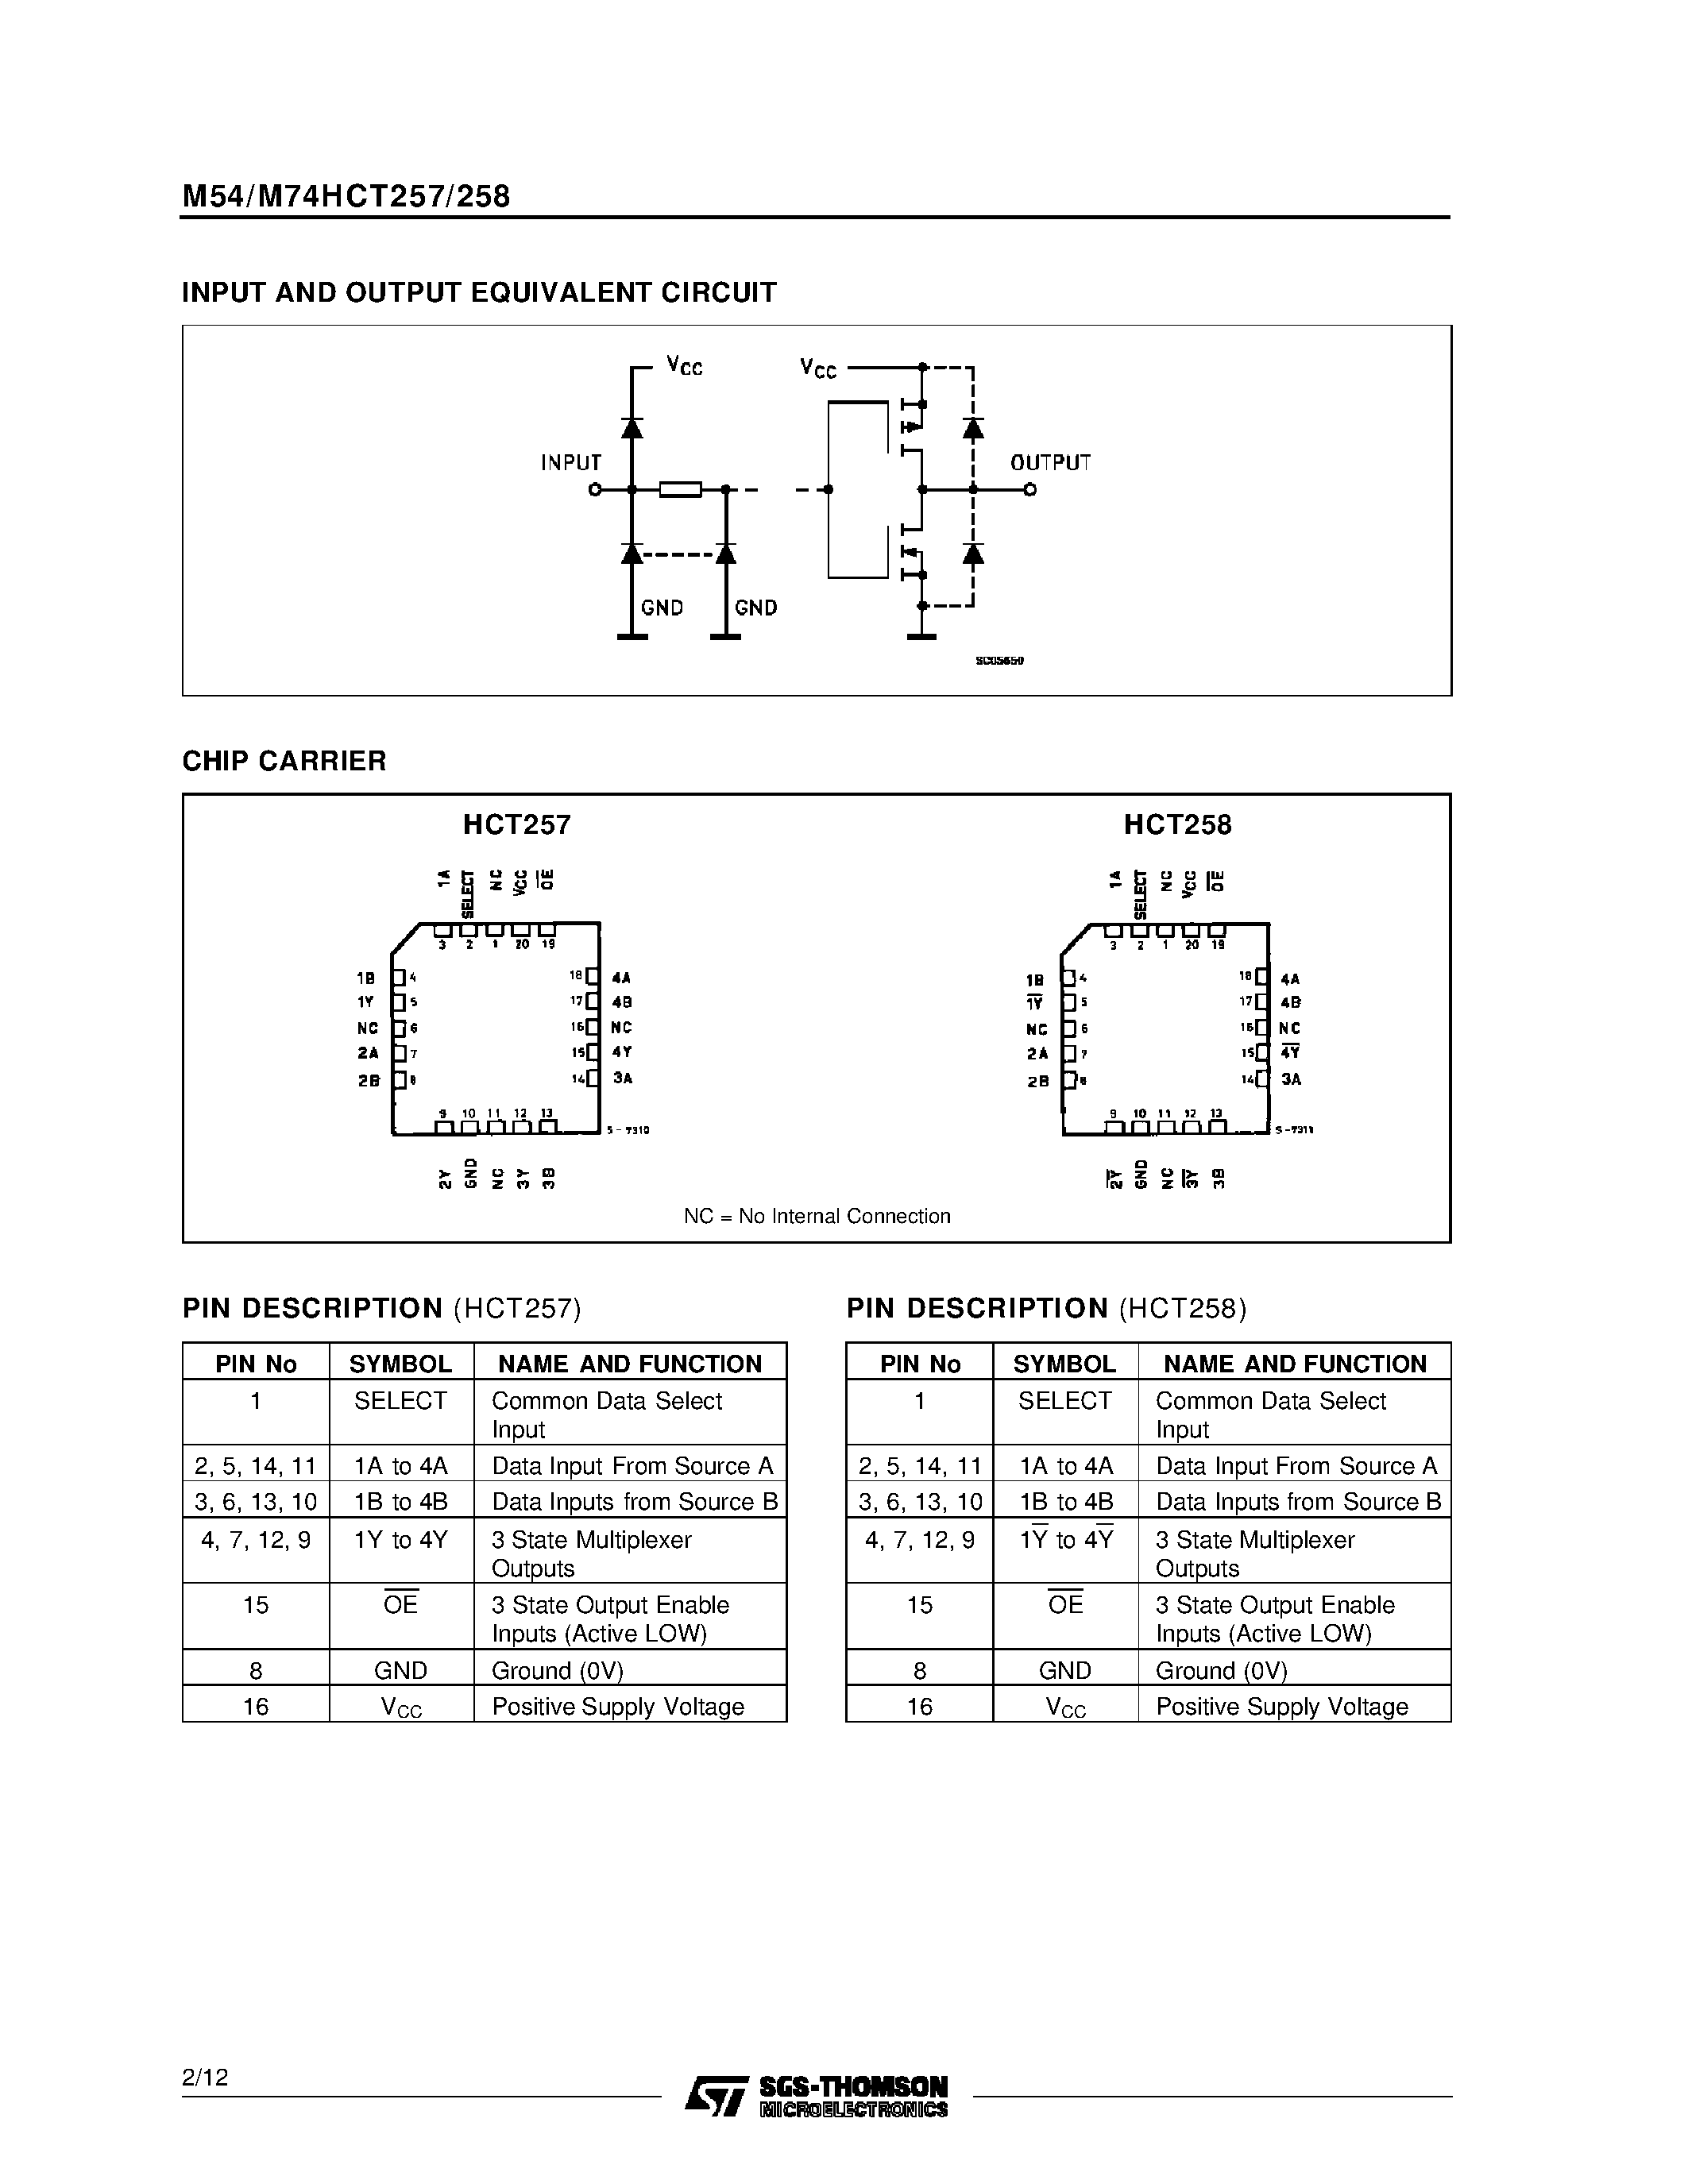 Datasheet M74HCT257 - HCT257 QUAD 2 CHANNEL MULTIPLEXER 3-STATE HCT258 QUAD 2 CHANNEL MULTIPLEXER 3-STATE / INVERTING page 2